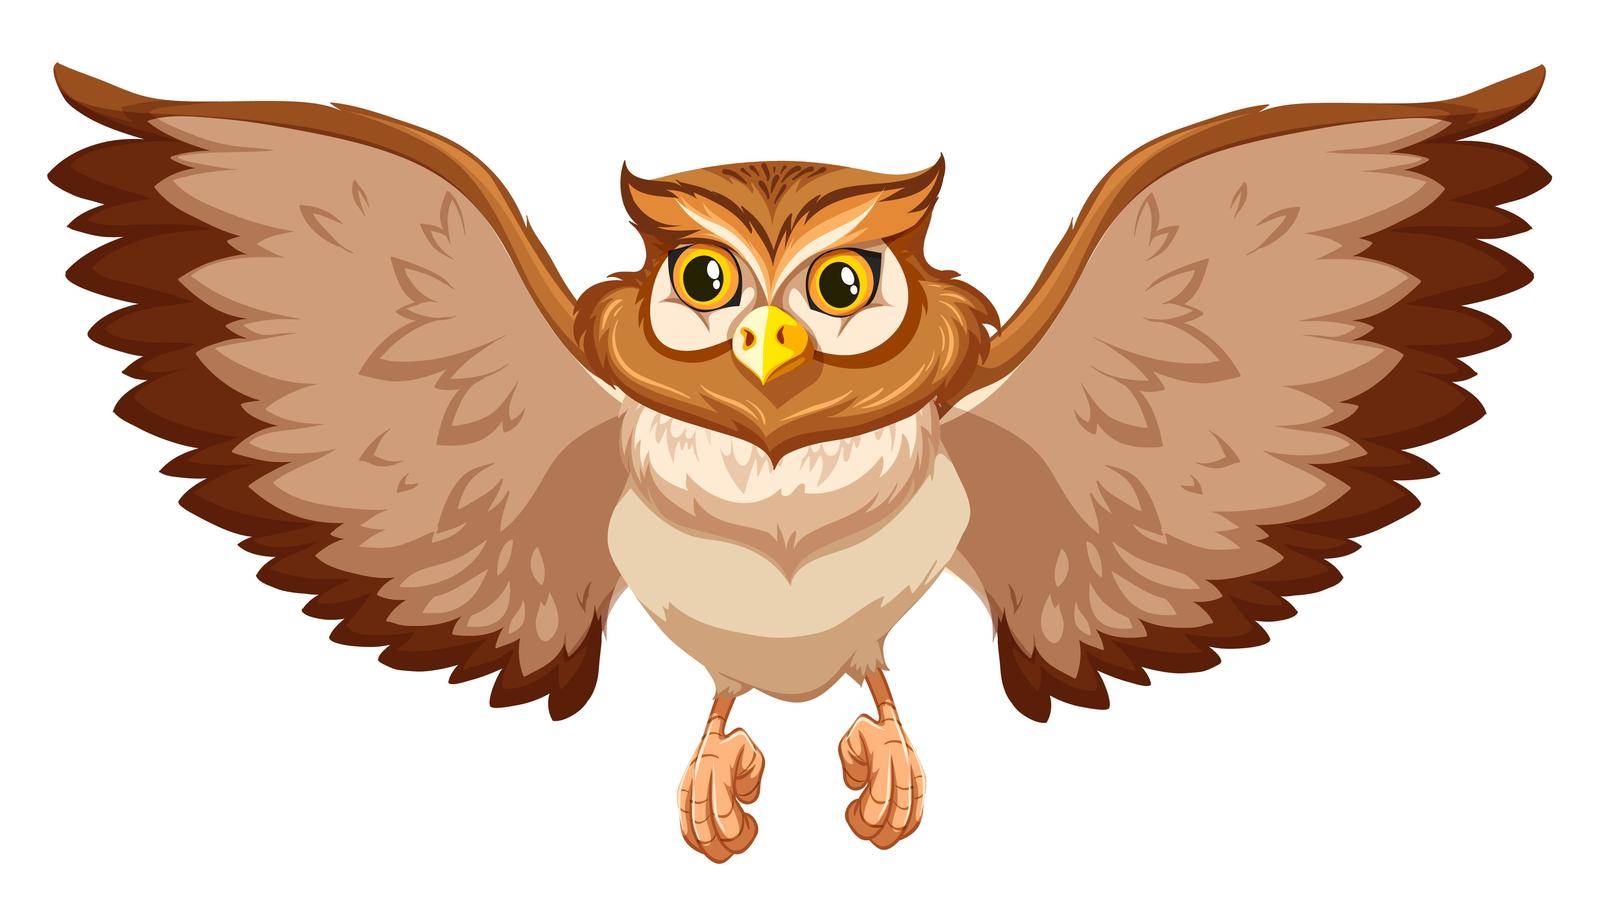 Brow owl with open wings